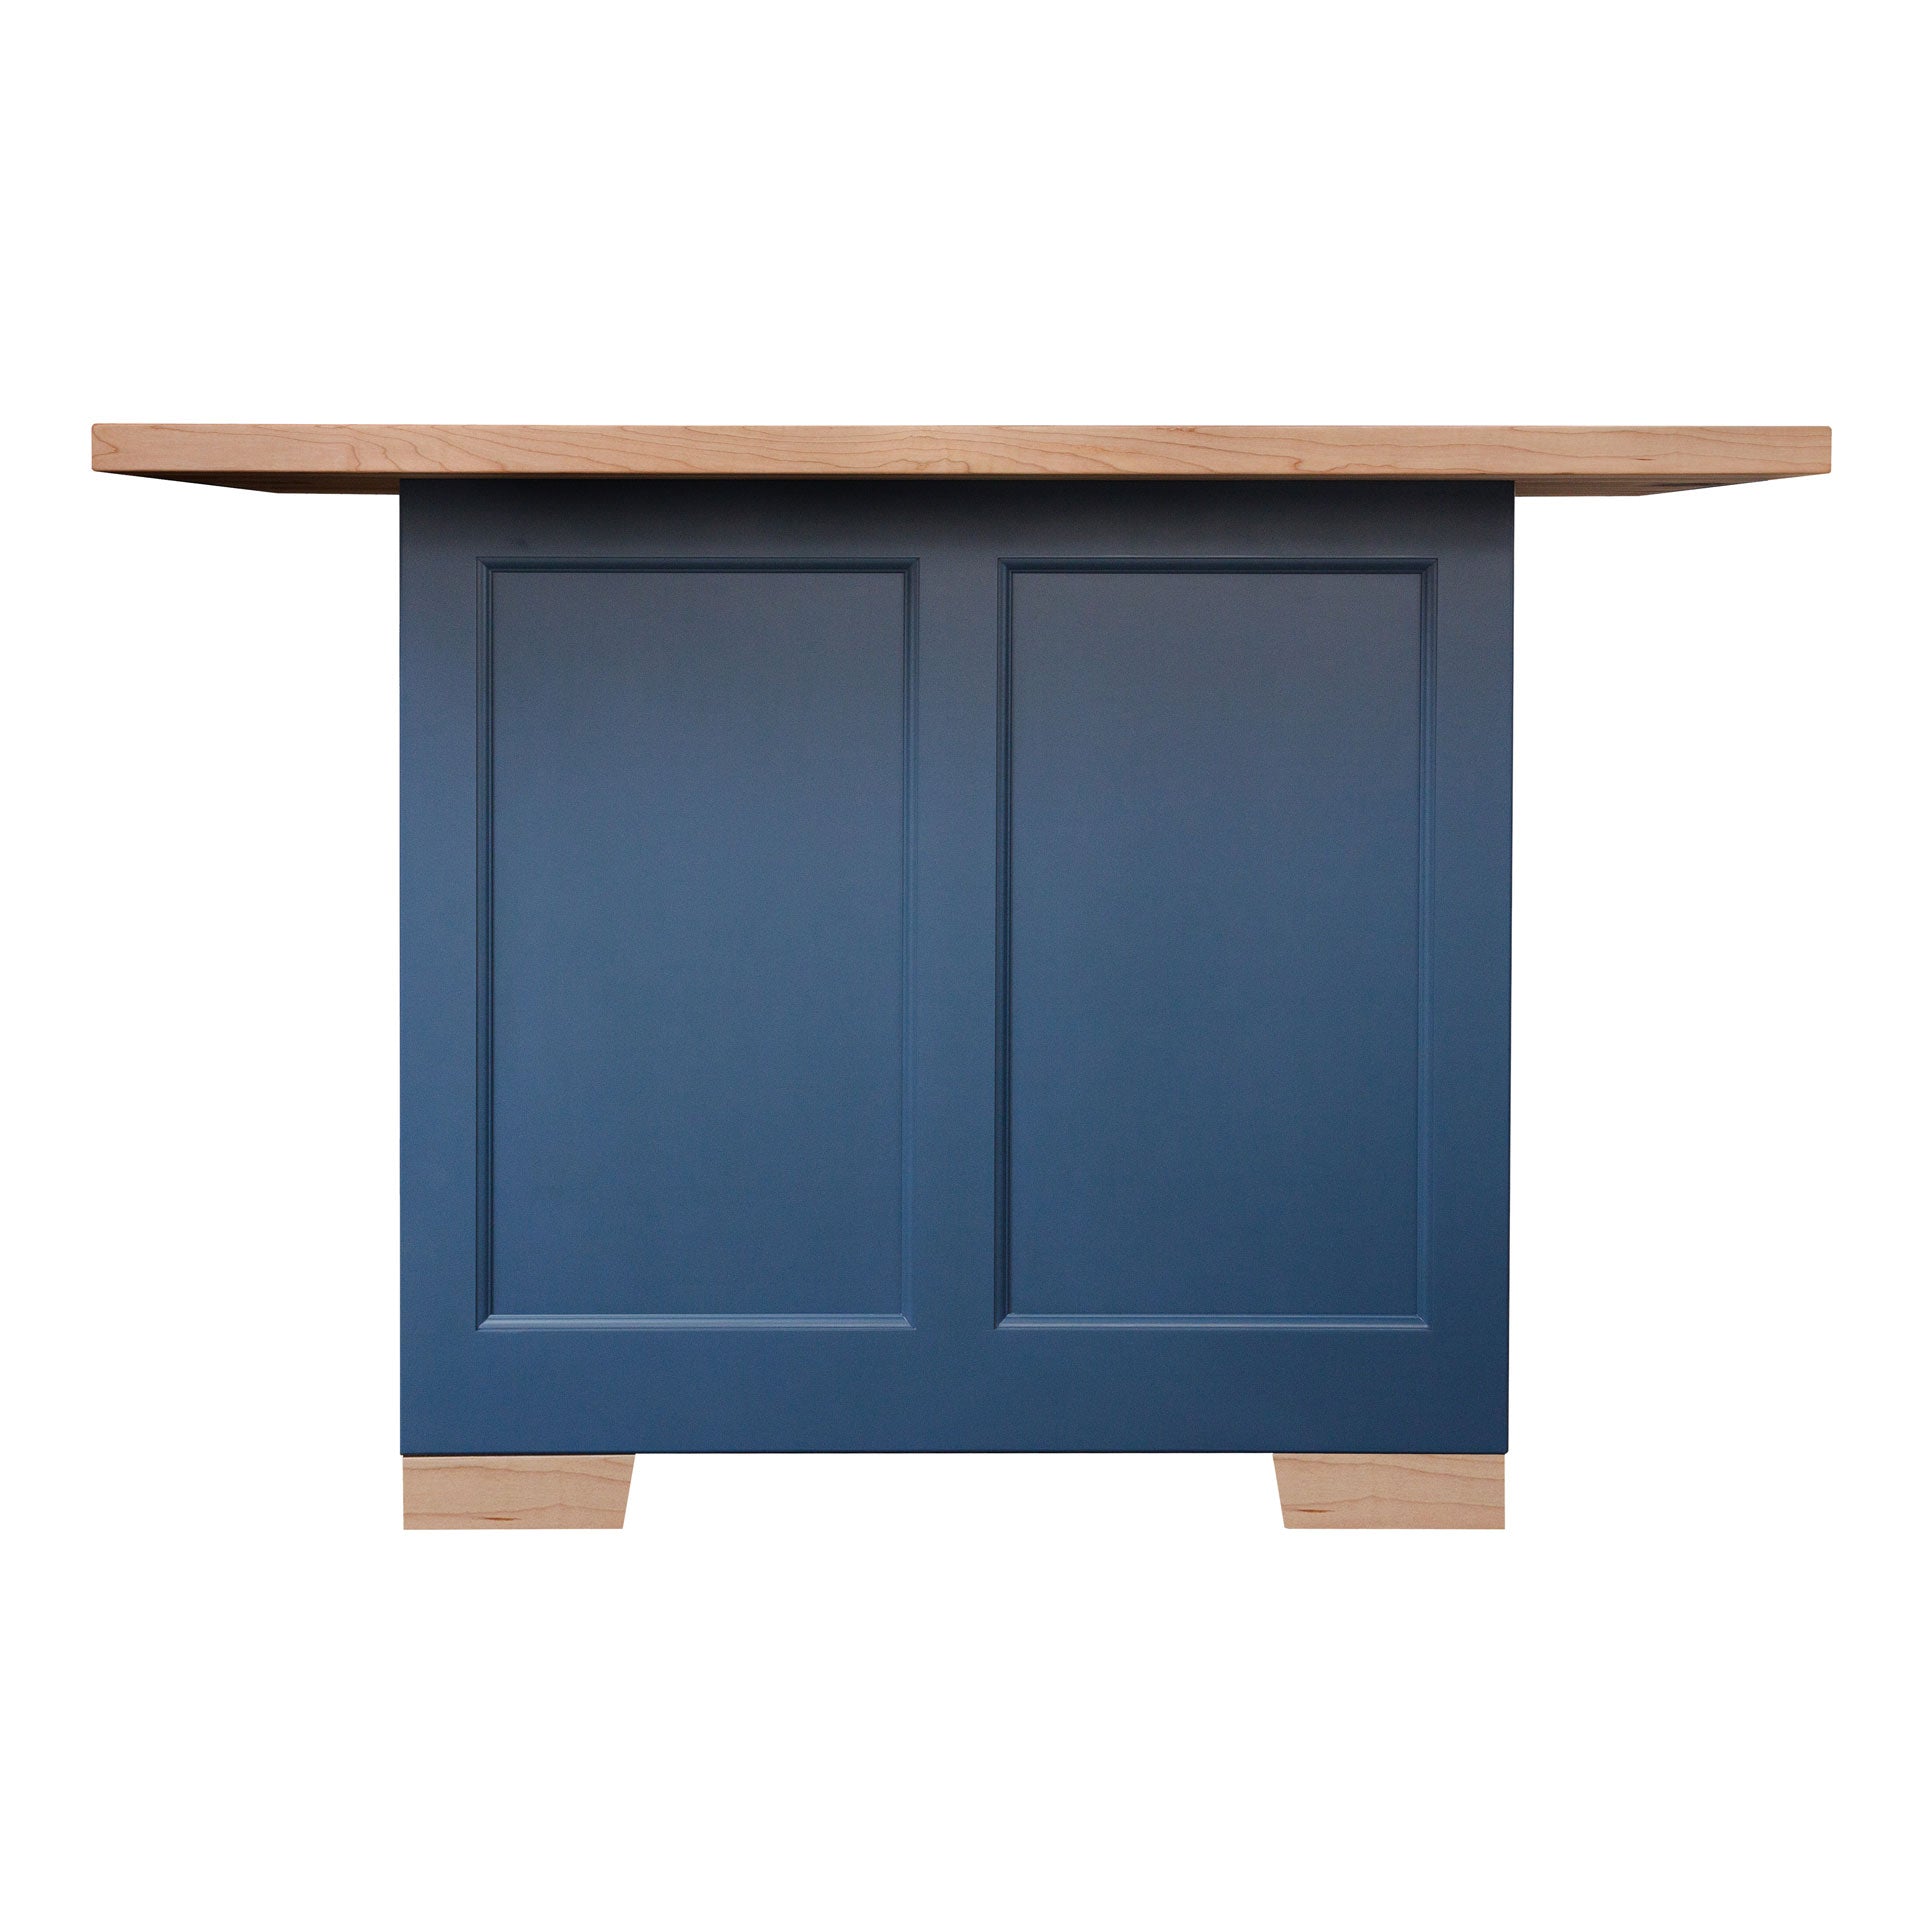 Amish Hudson 52" Small Butcher Block Kitchen Island - Royal Blue - As Shown - snyders.furniture